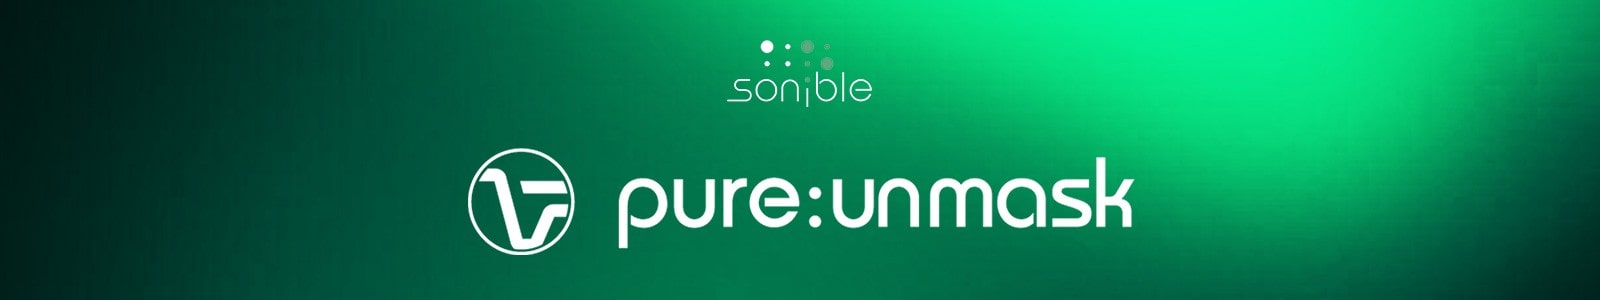 Sonible pure:unmask